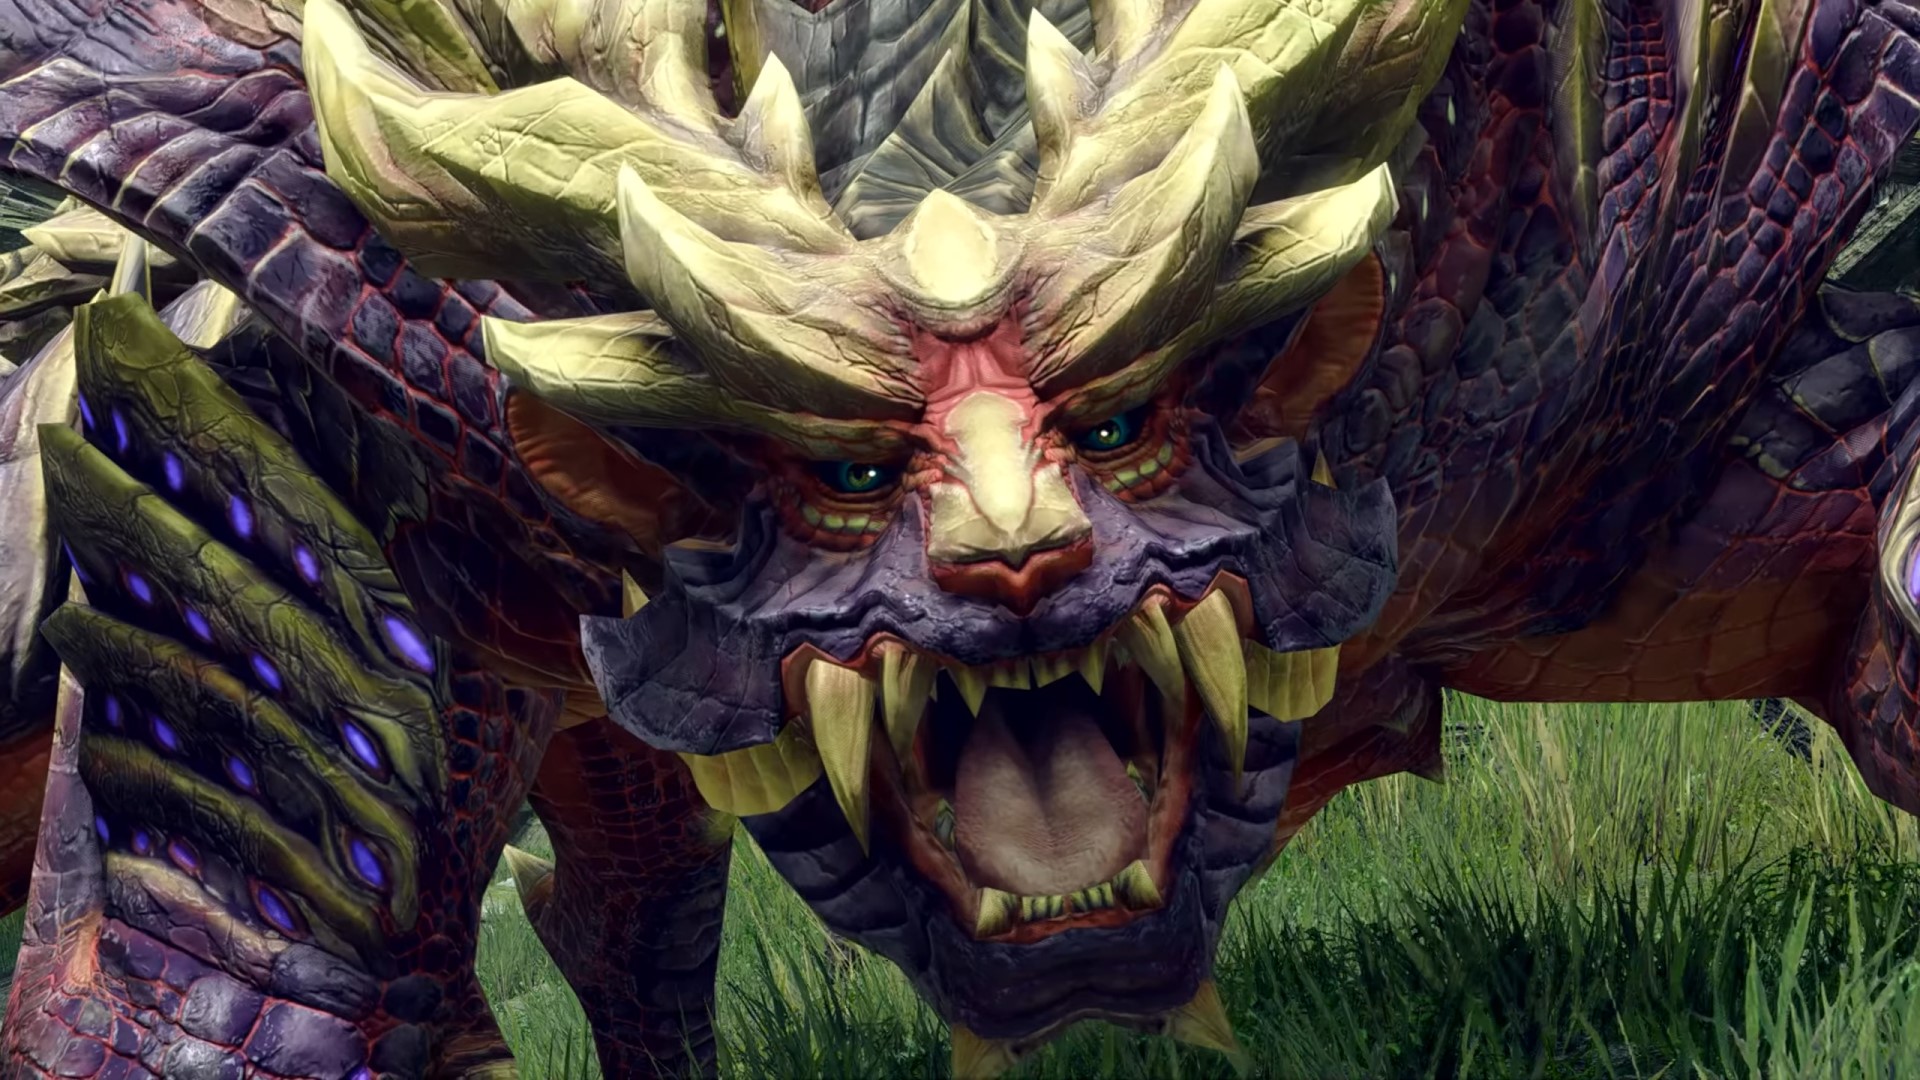 Monster Hunter Rise’s Rathalos and Magnamalo look ferocious in 4K